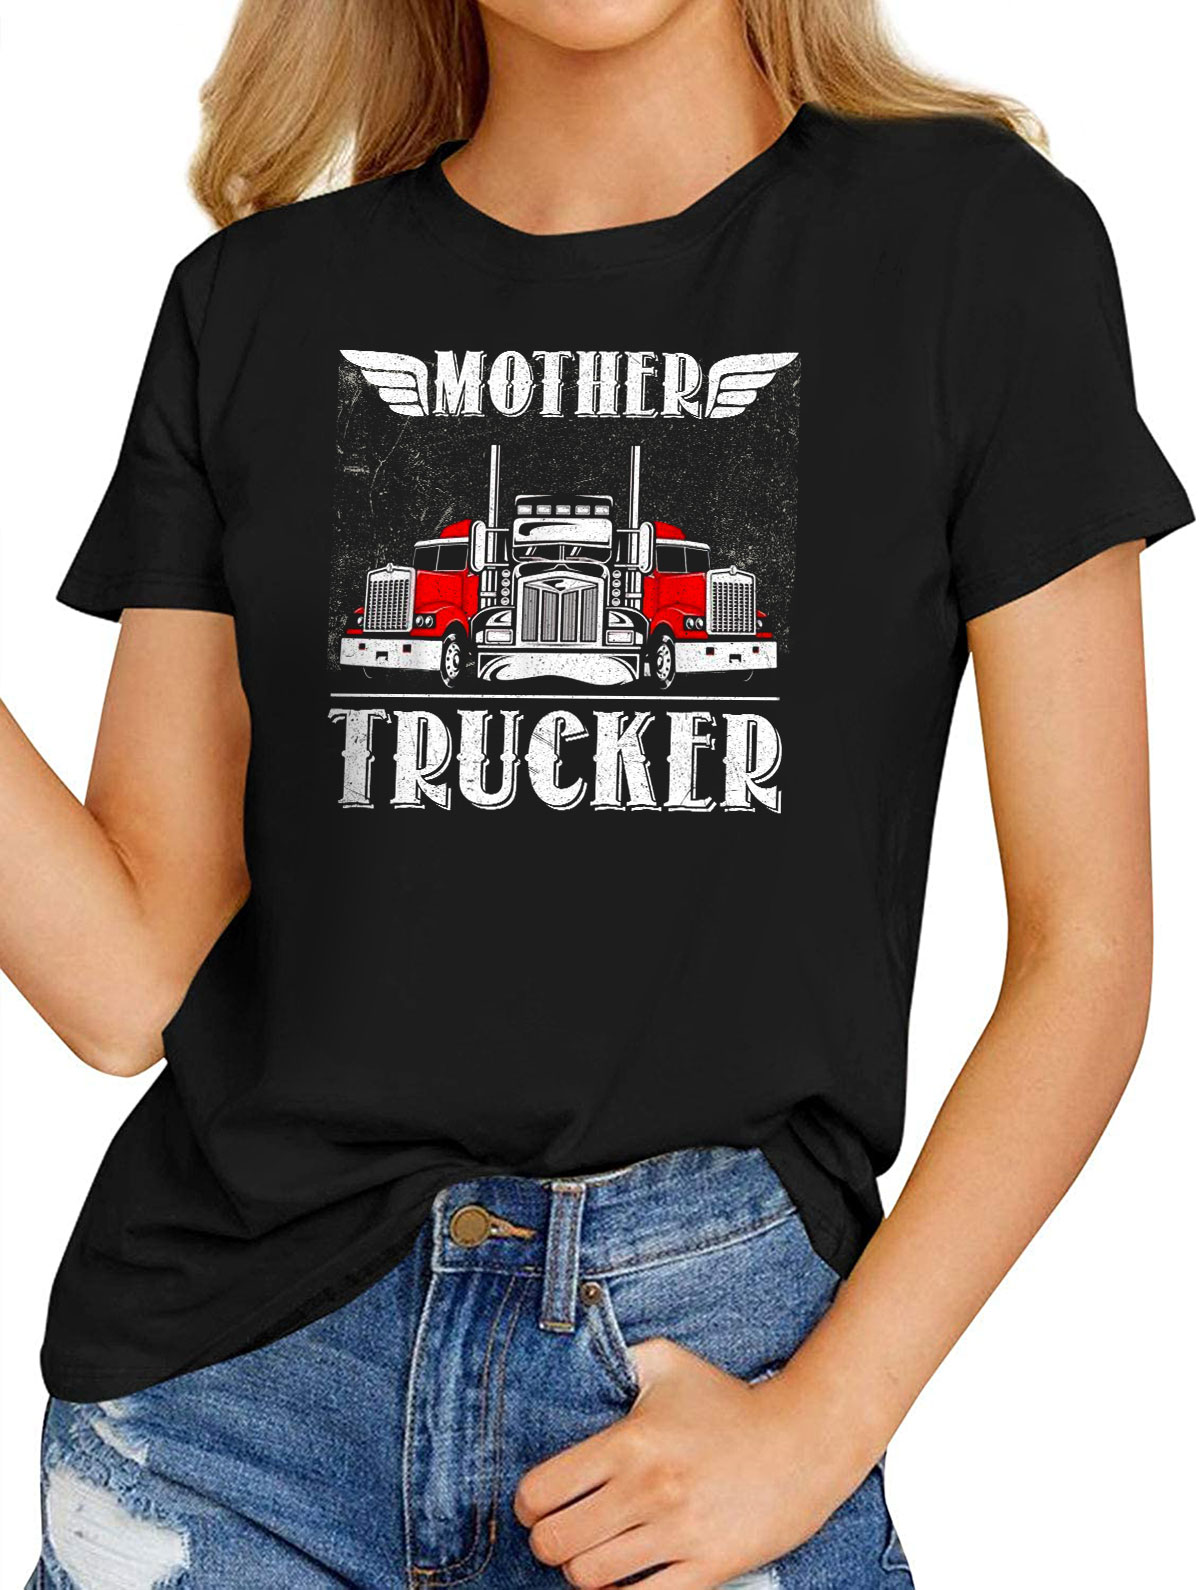 Womens Fashion T Shirts Mother Trucker Funny Mother Trucker Mom Truck Driver T Shirt 0972